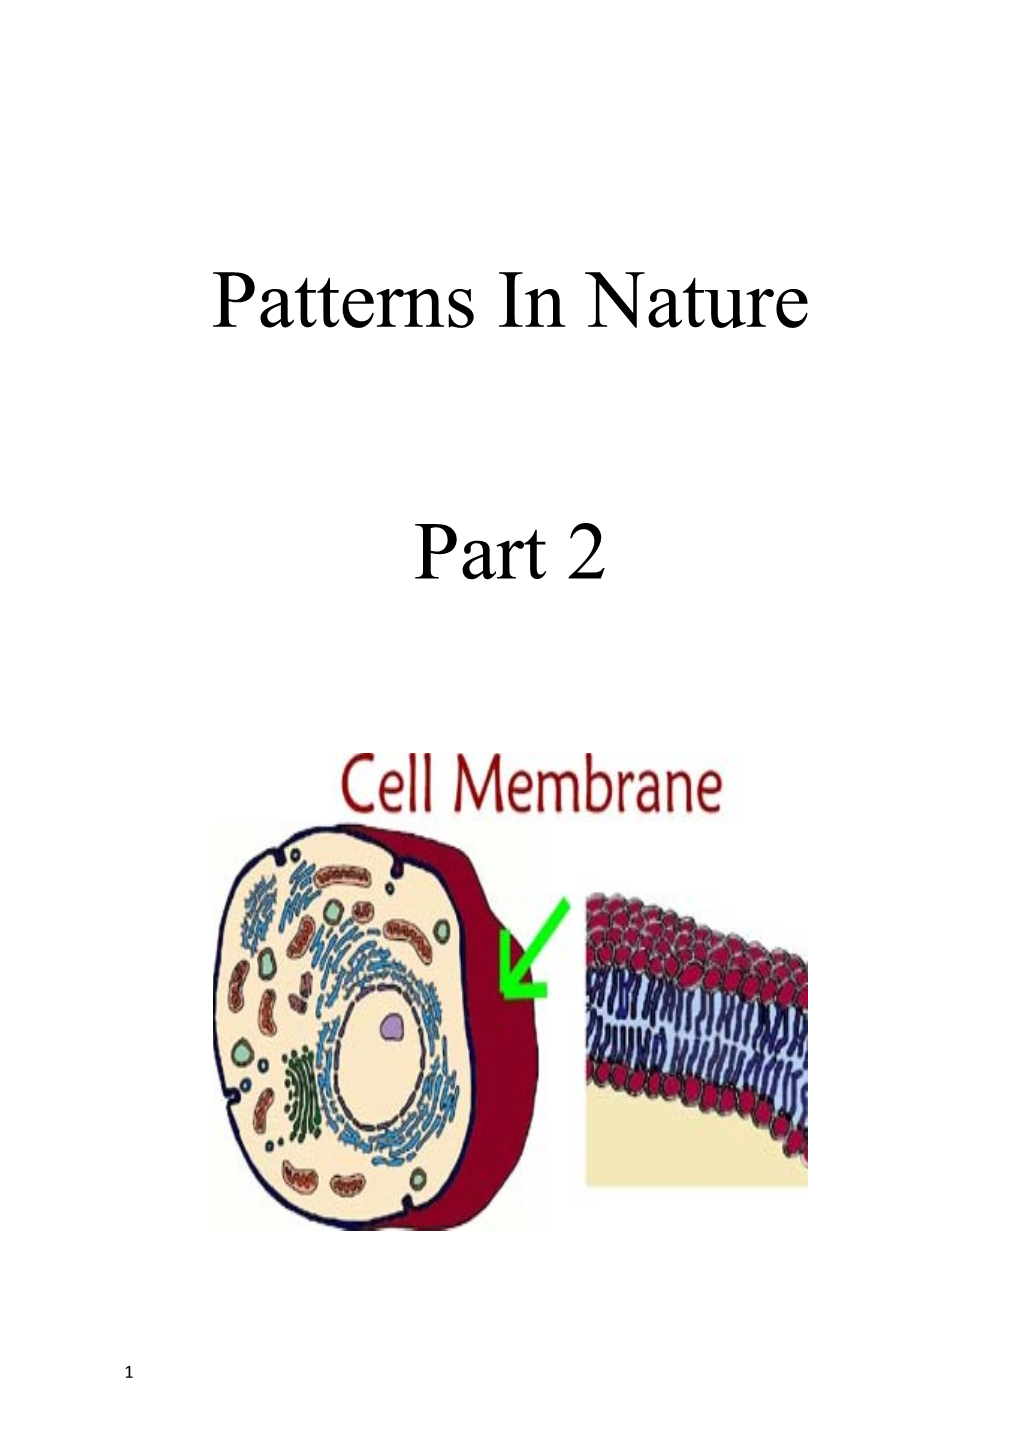 Membranes Around Cells Provide Separation from and Links with the External Environment